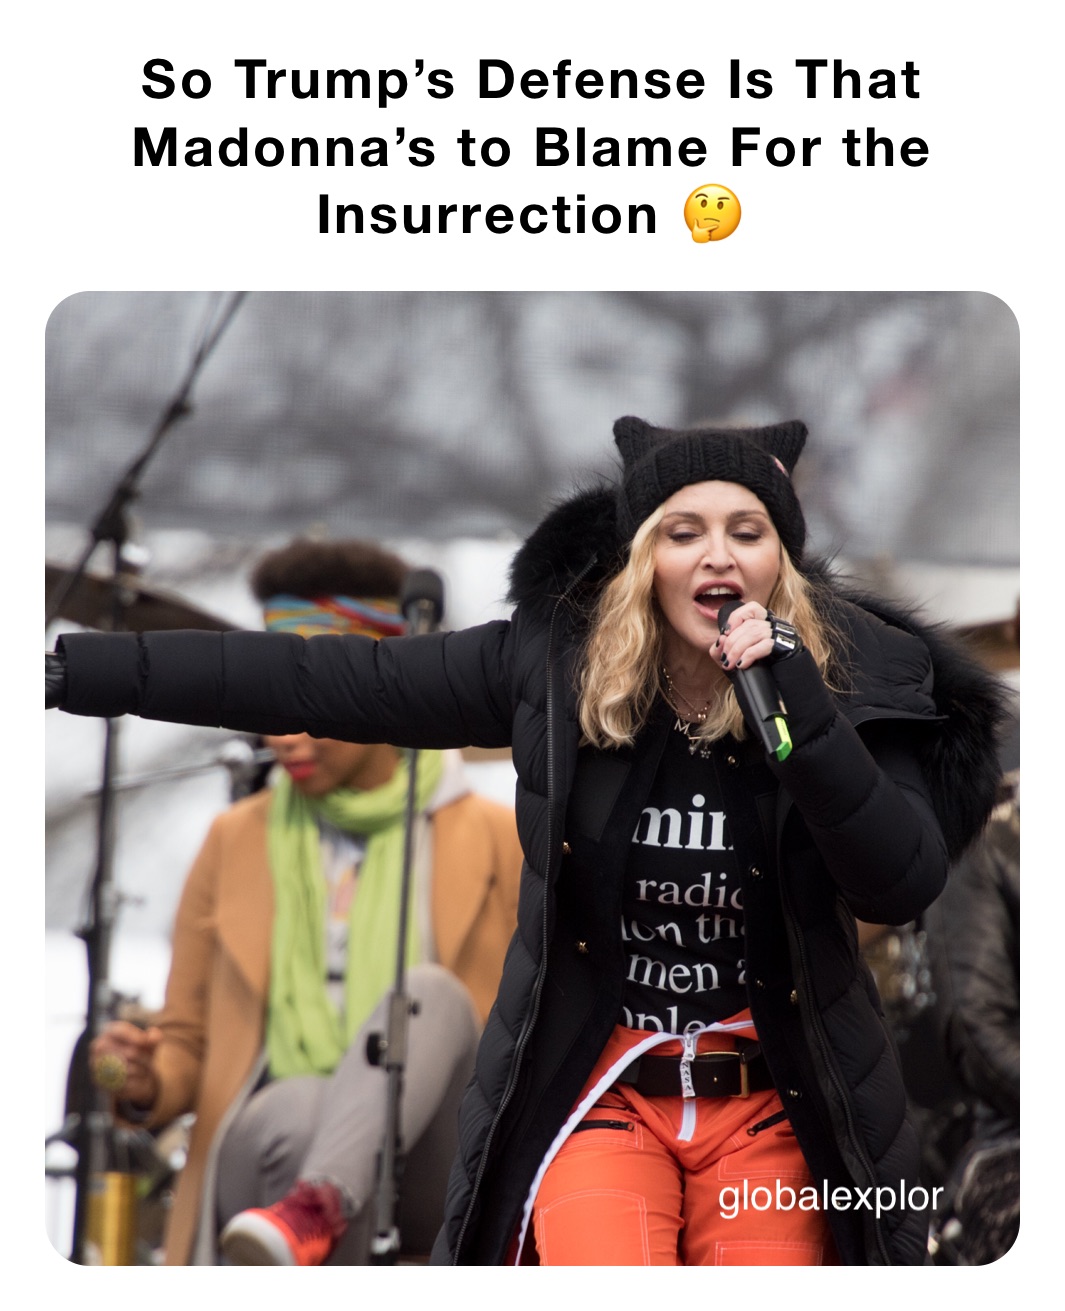 So Trump’s Defense Is That Madonna’s to Blame For the Insurrection 🤔